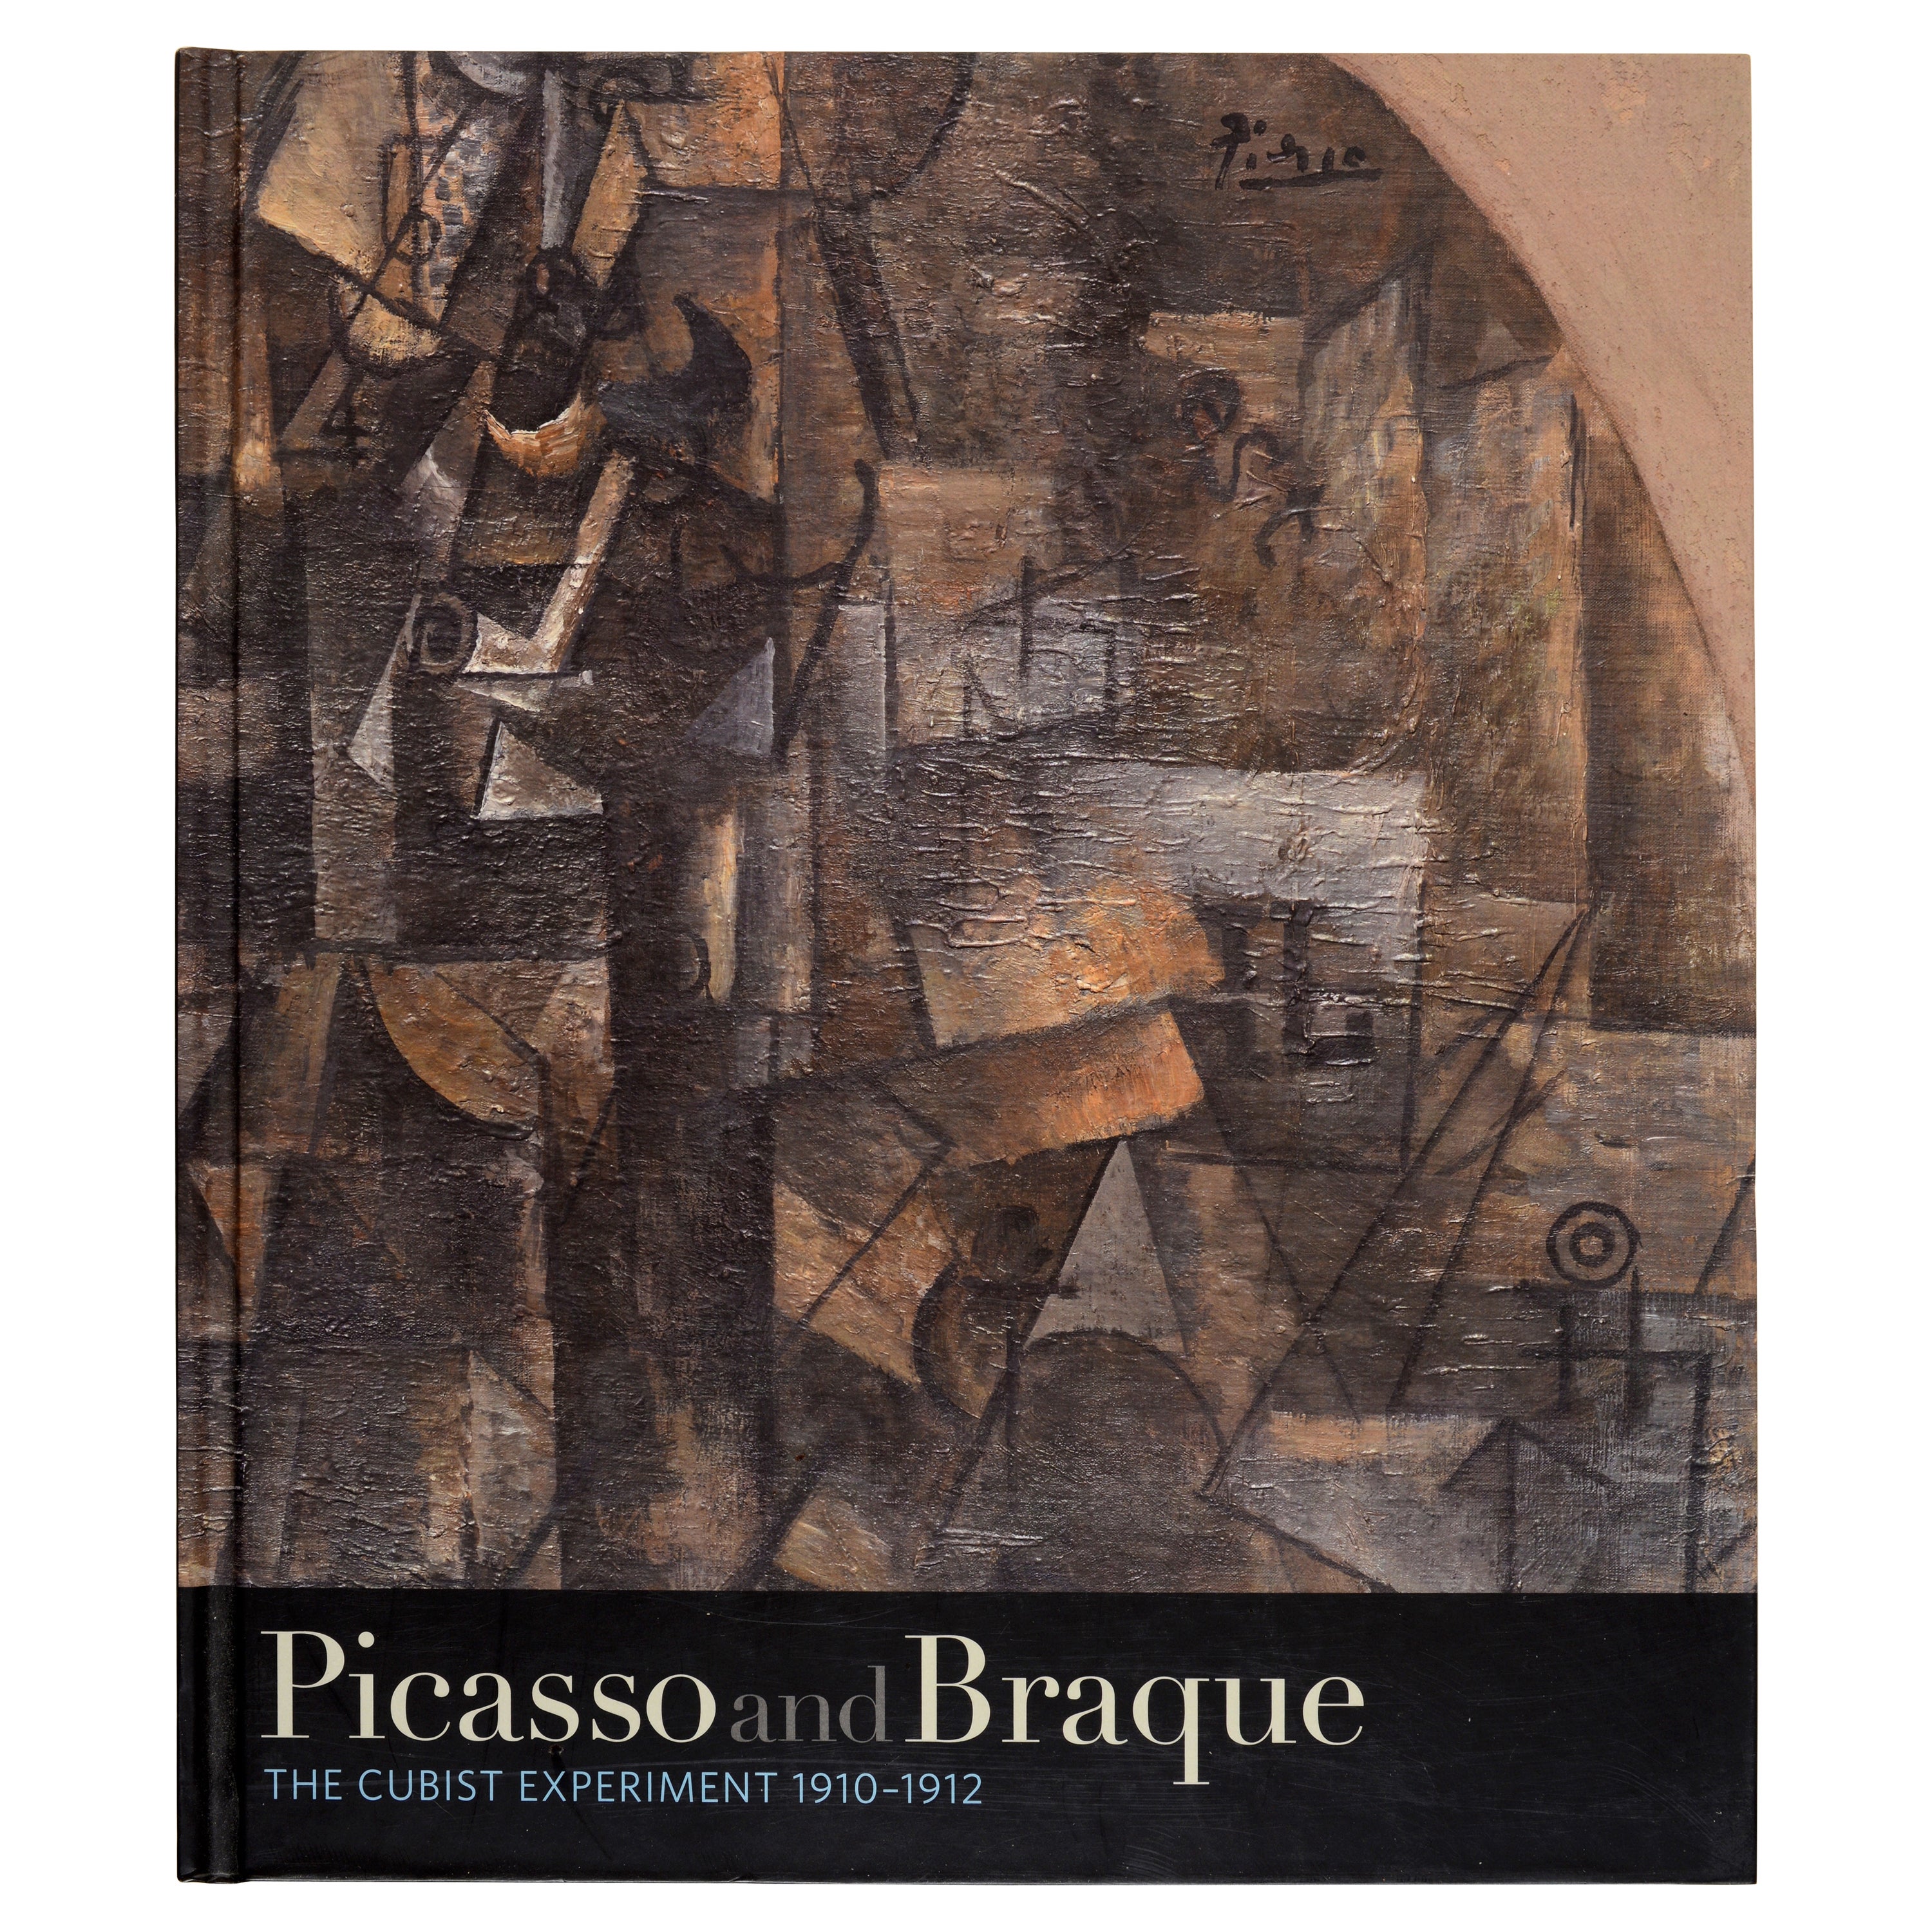 Picasso and Braque The Cubist Experiment, 1910-1912, 9/17/2011-01/08/2012